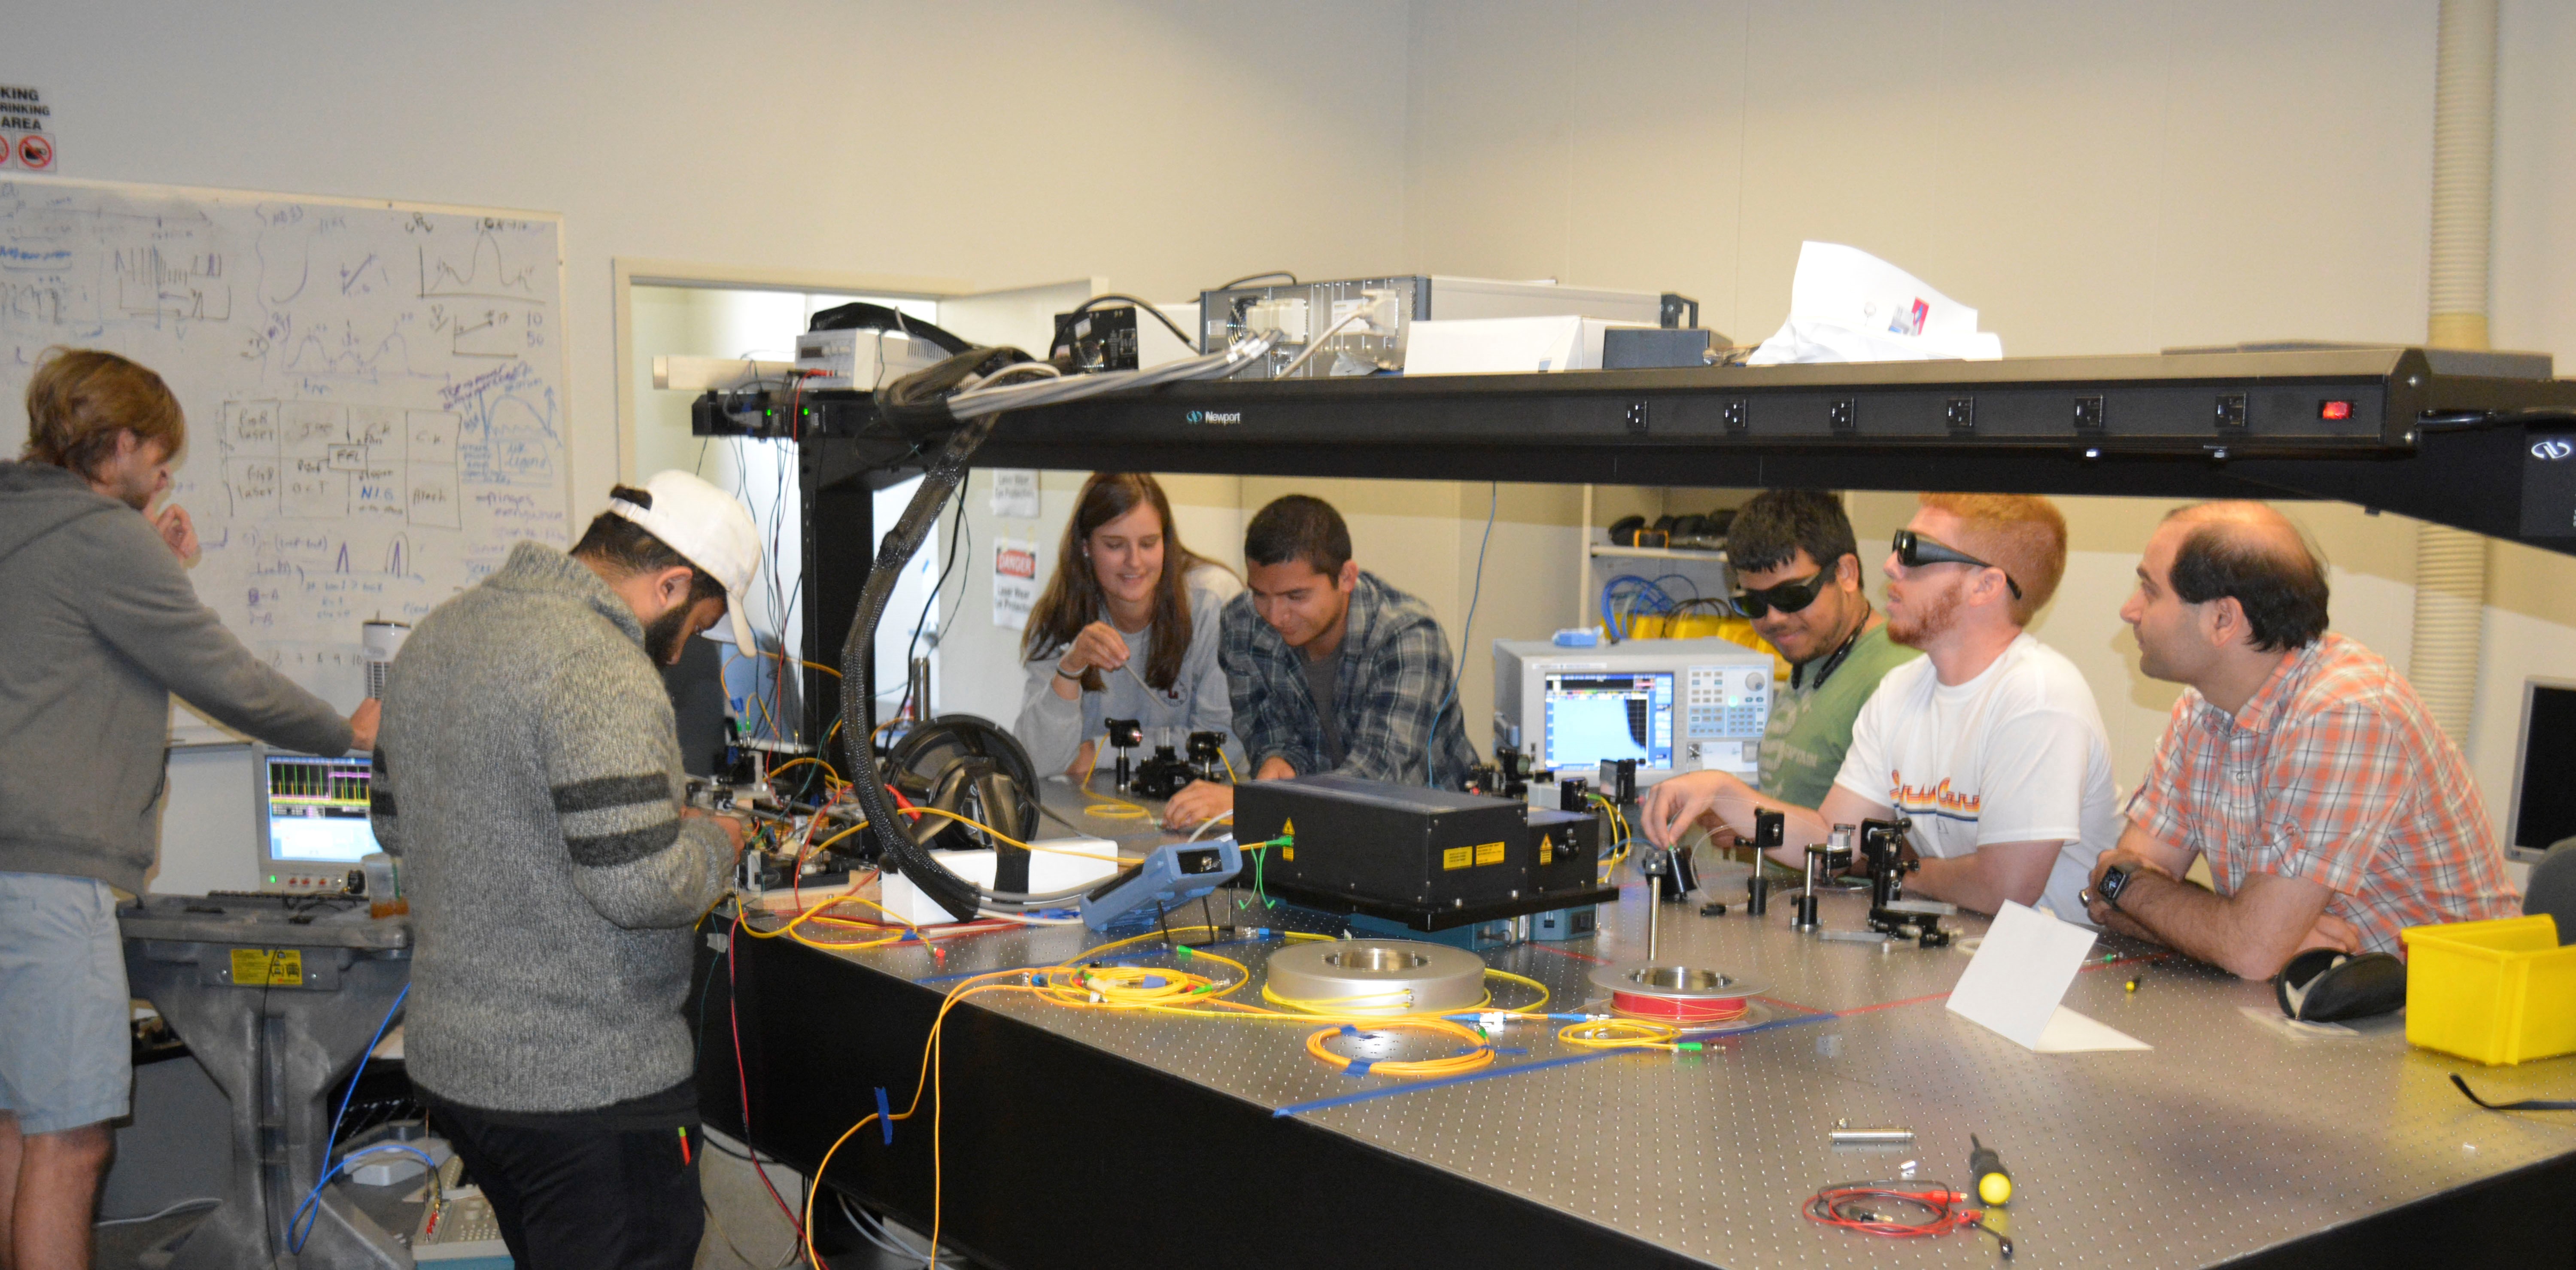 Students working on various projects in the photonics laboratory